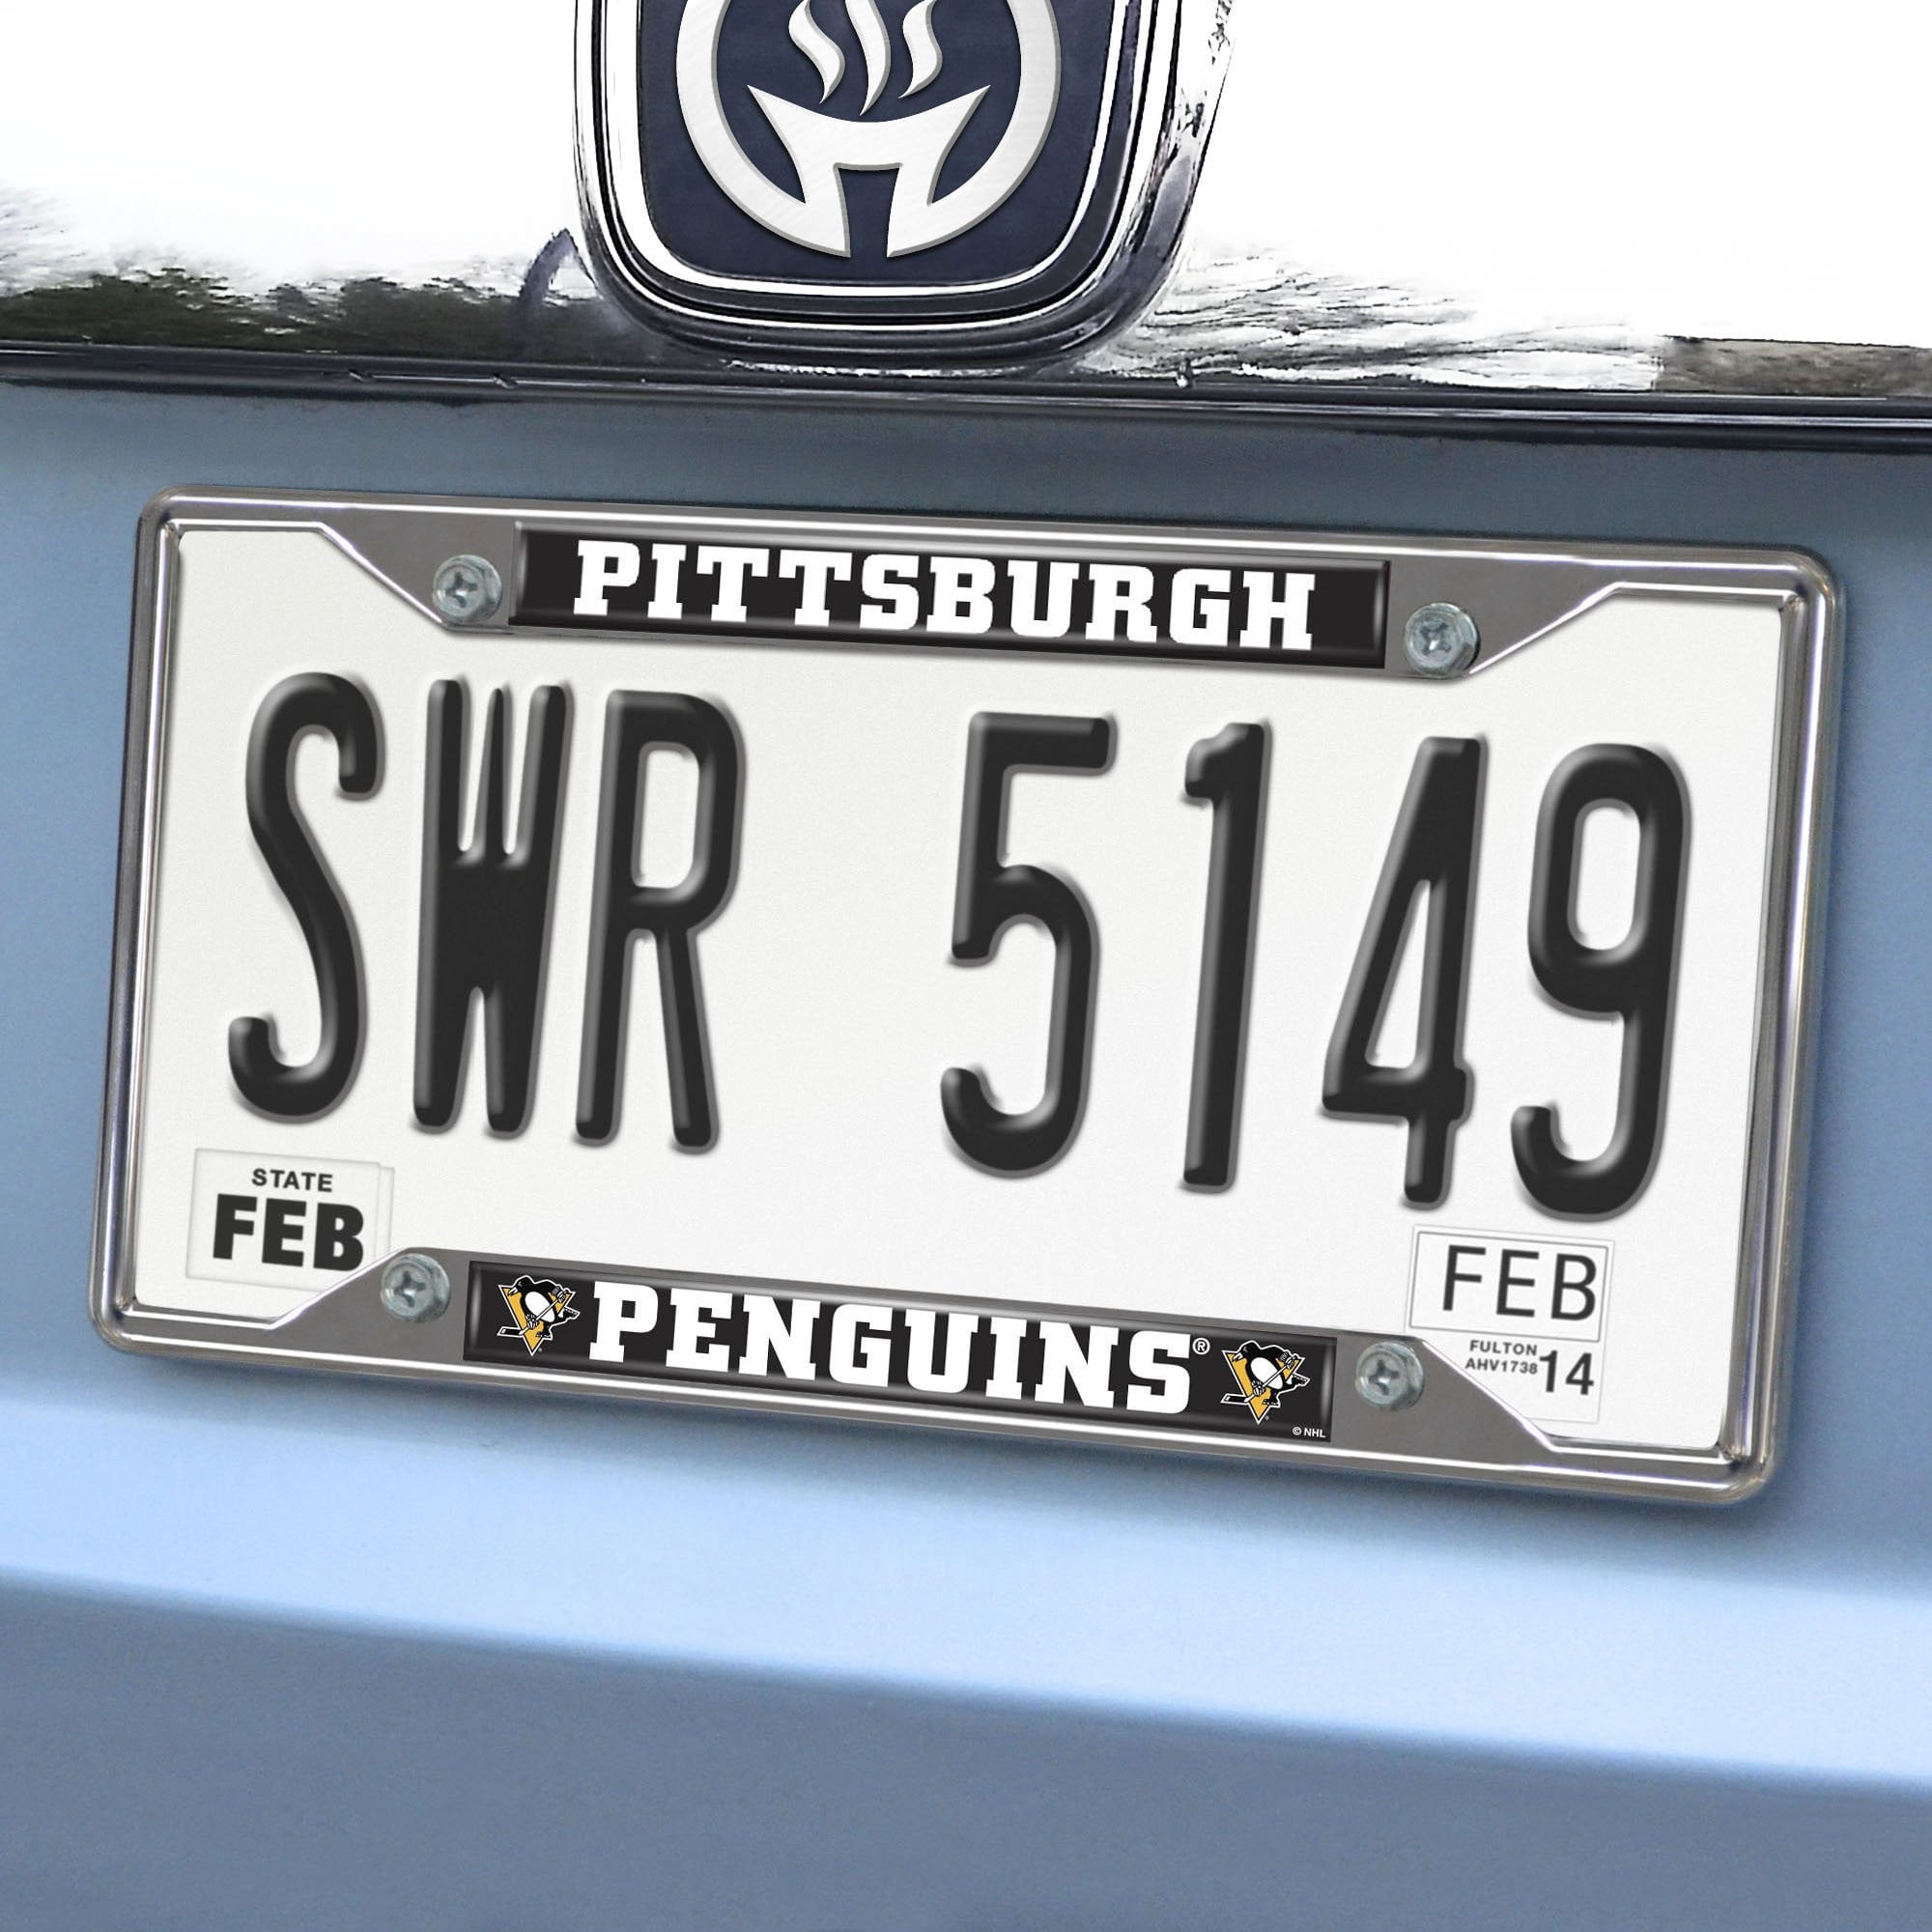 NHL - Pittsburgh Penguins  License Plate Frame & Accessories